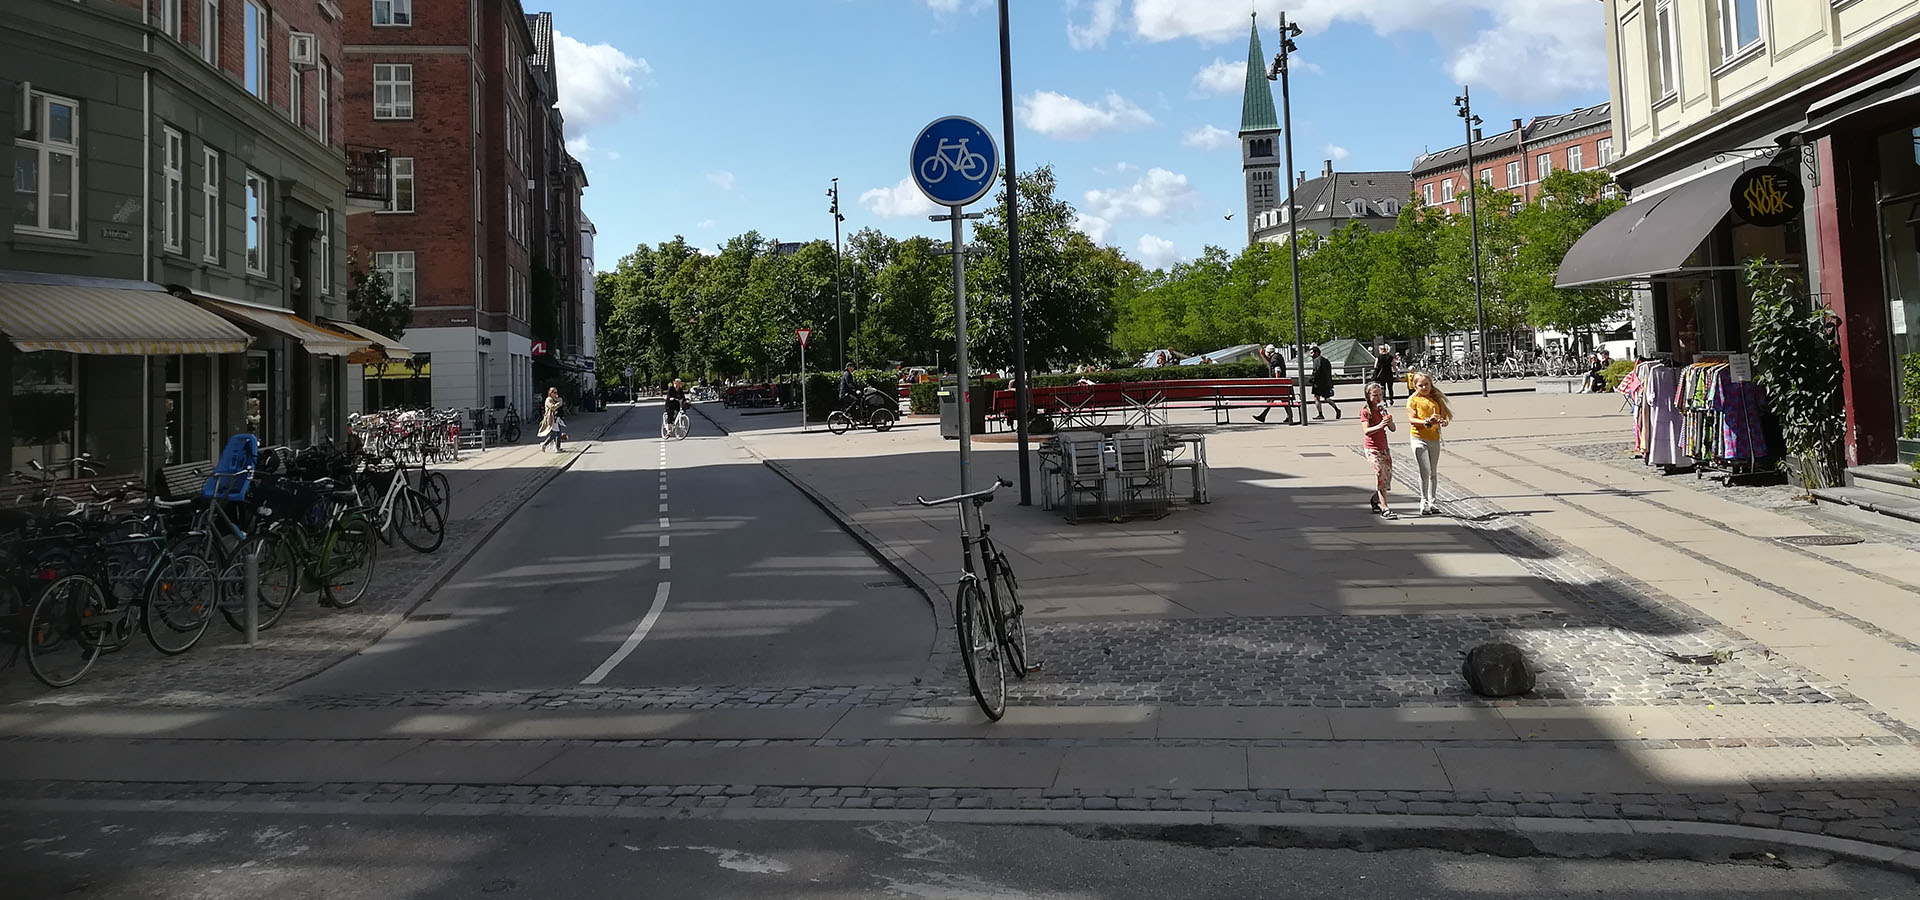 Vesterbro Enghave plads